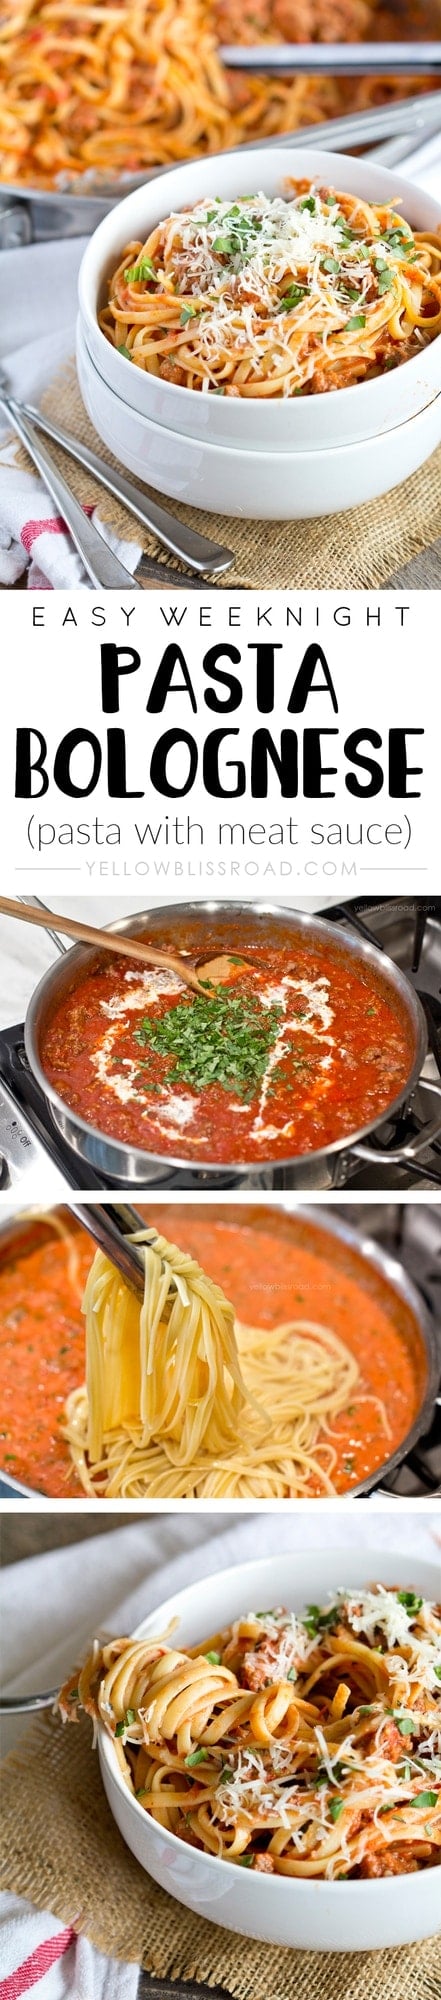 Easy Weeknight Pasta Bolognese - Perfect for busy weeknights and ready in 30 minutes. Such a rich and meaty tomato sauce that your whole family will love!